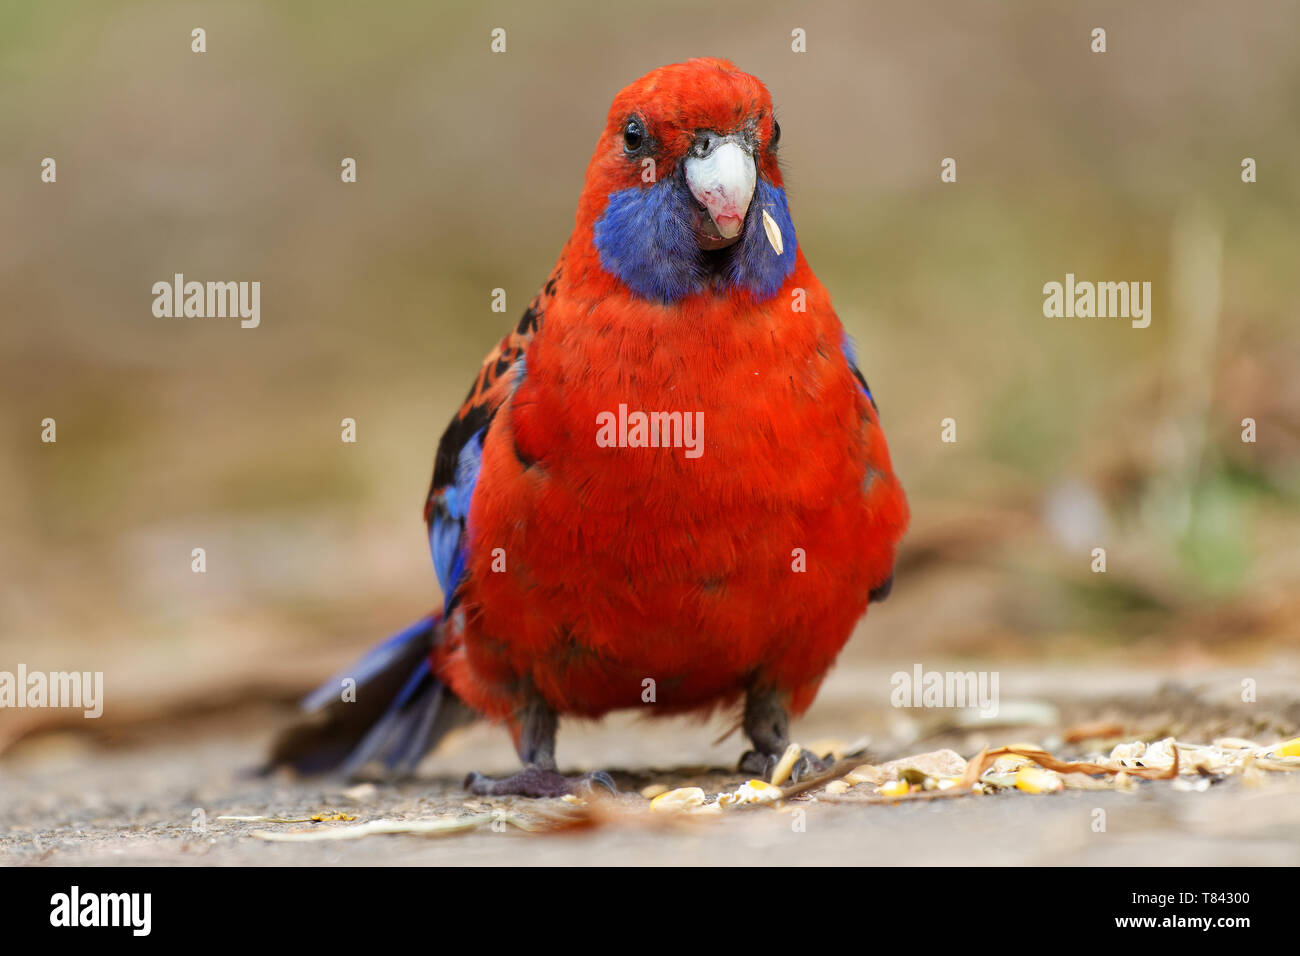 Crimson Rosella - Platycercus elegans a parrot native to eastern and south eastern Australia, introduced to New Zealand and Norfolk Island, mountain f Stock Photo